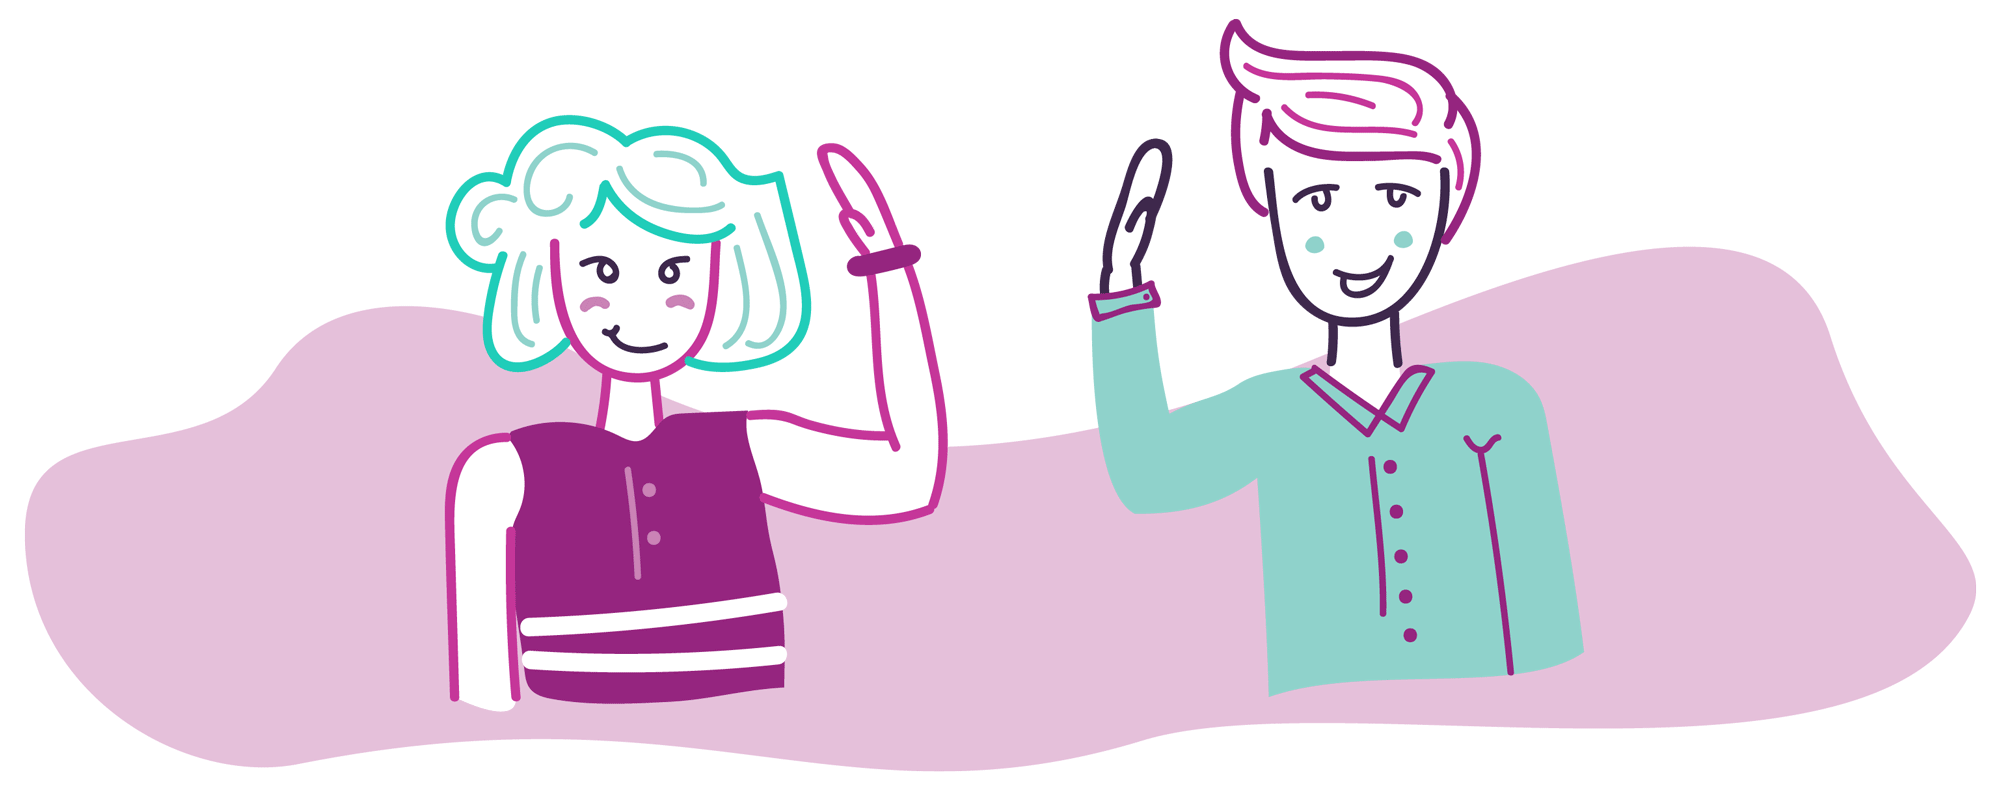 Illustration of a woman and a man high-fiving each other.